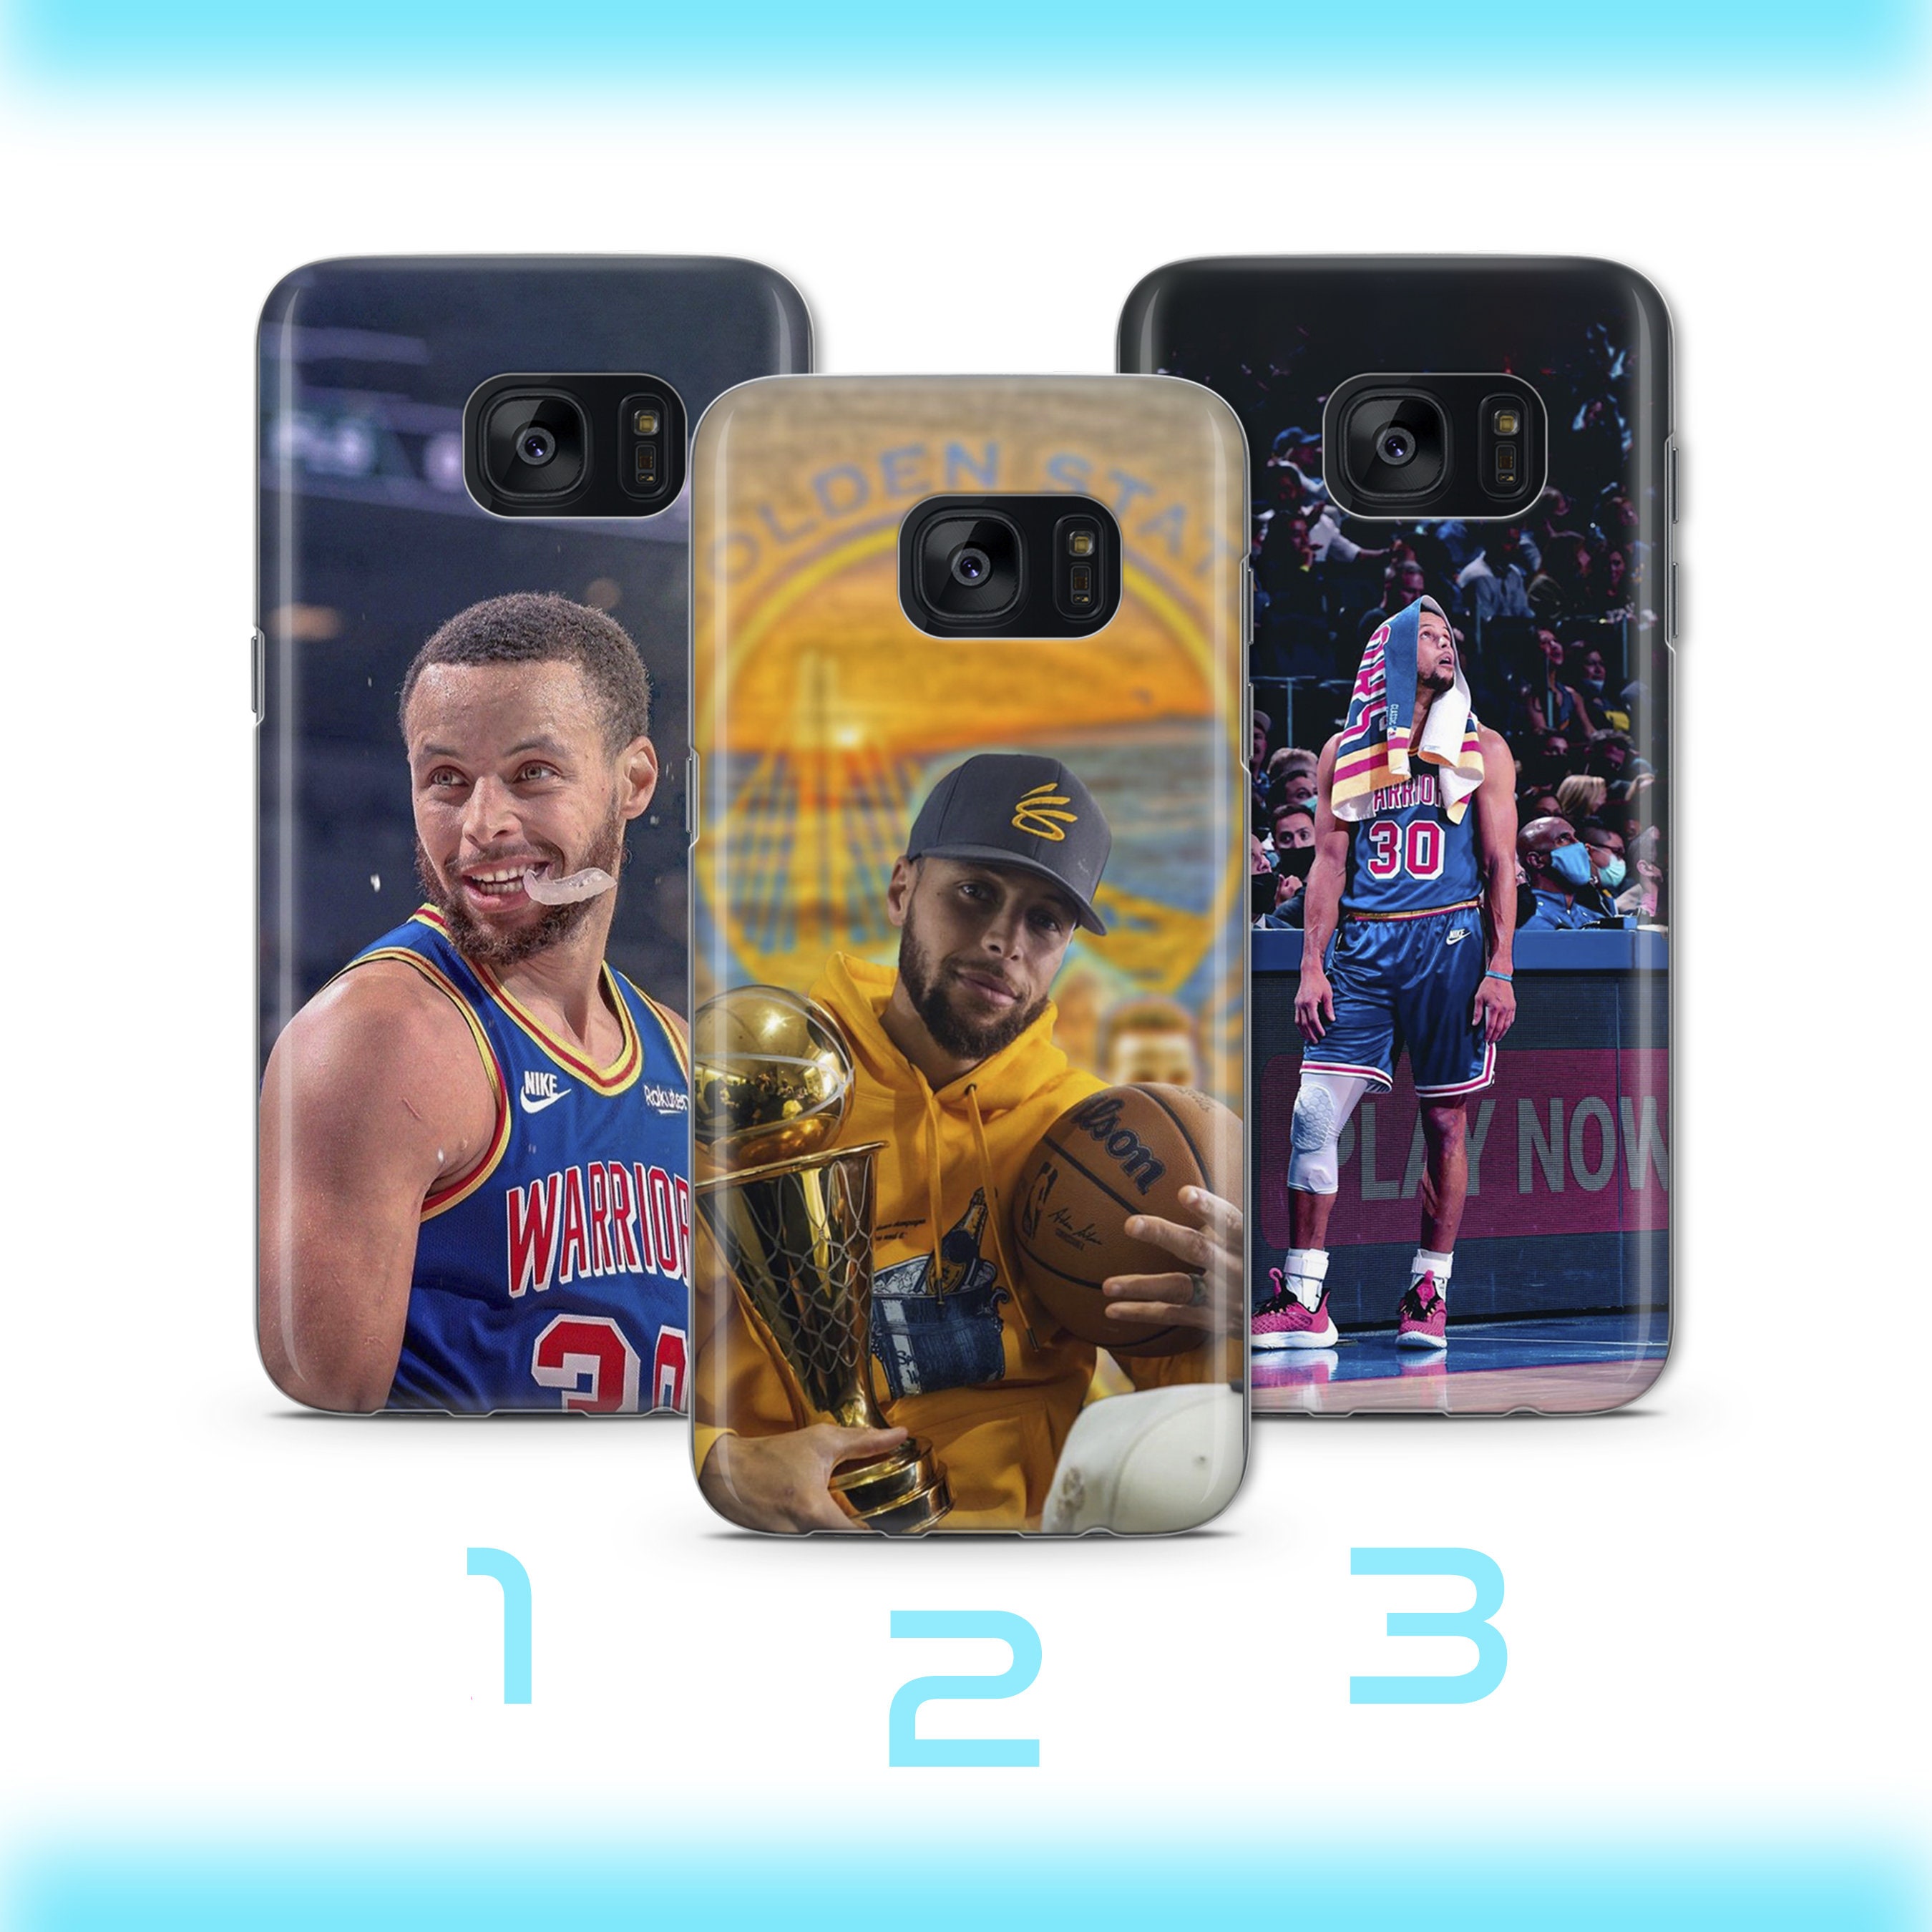 Basketball 5 for Samsung Galaxy S7 S8 S9 Edge Plus Etsy